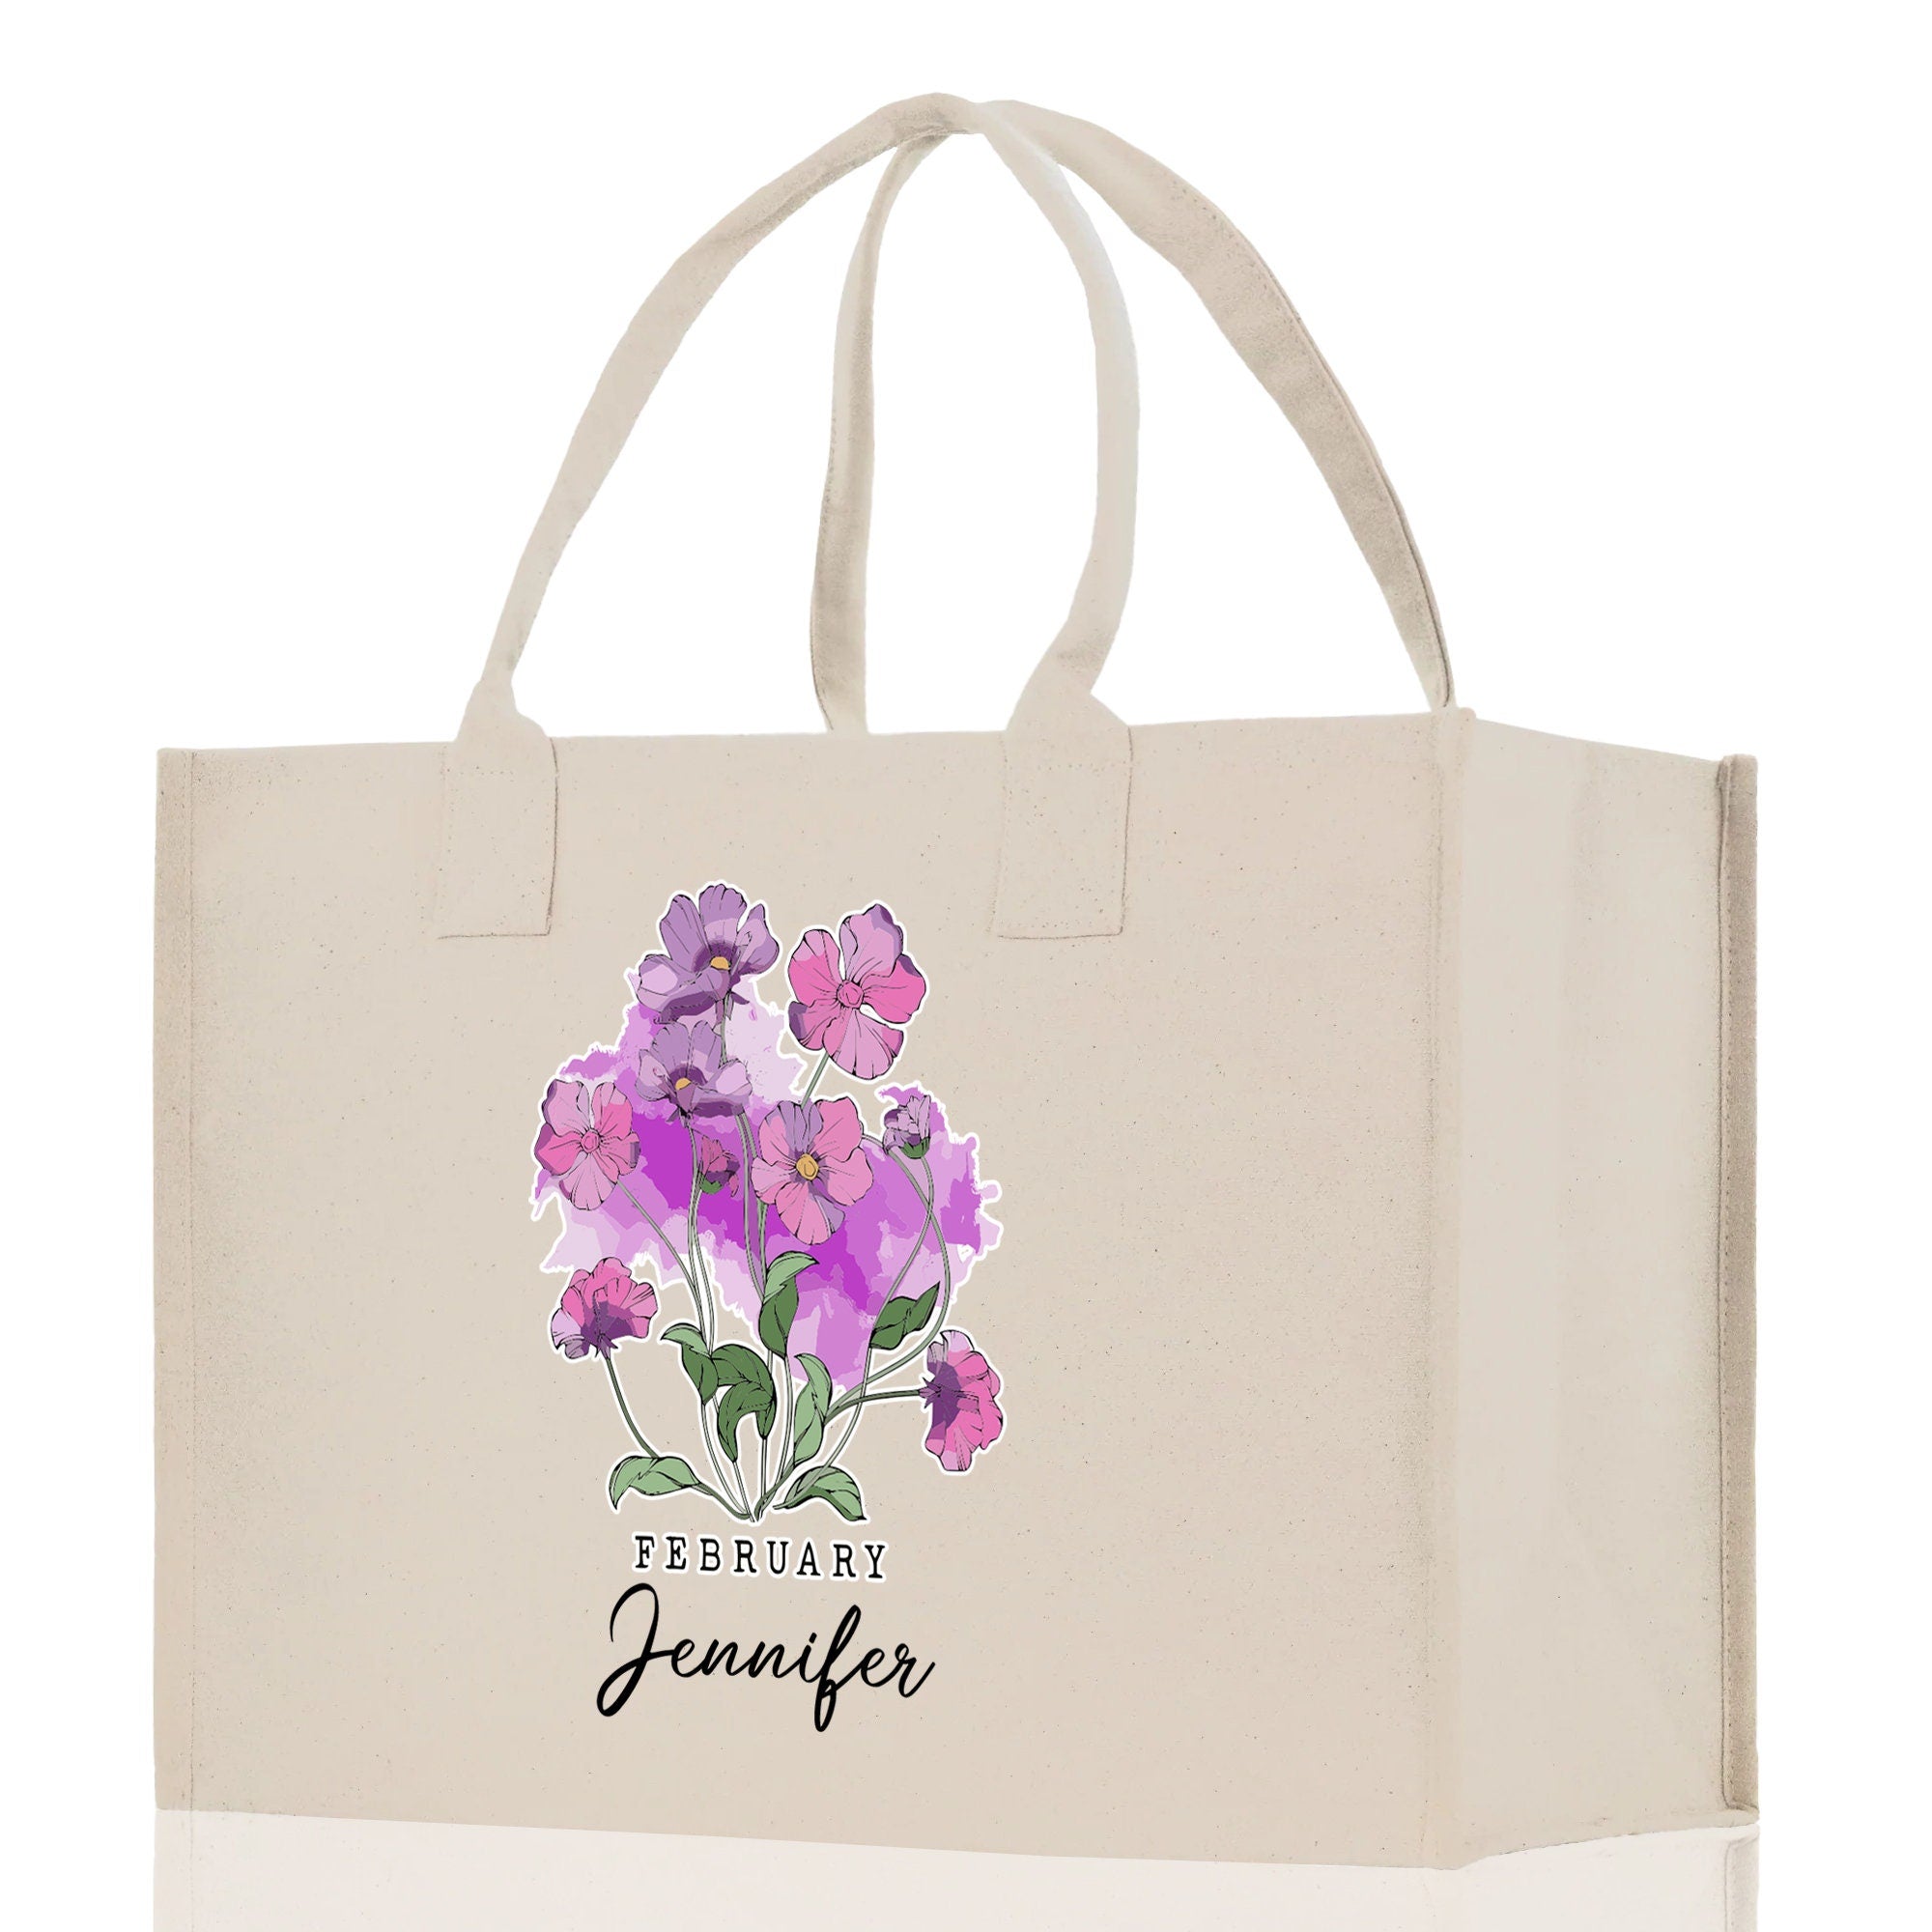 a shopping bag with flowers painted on it